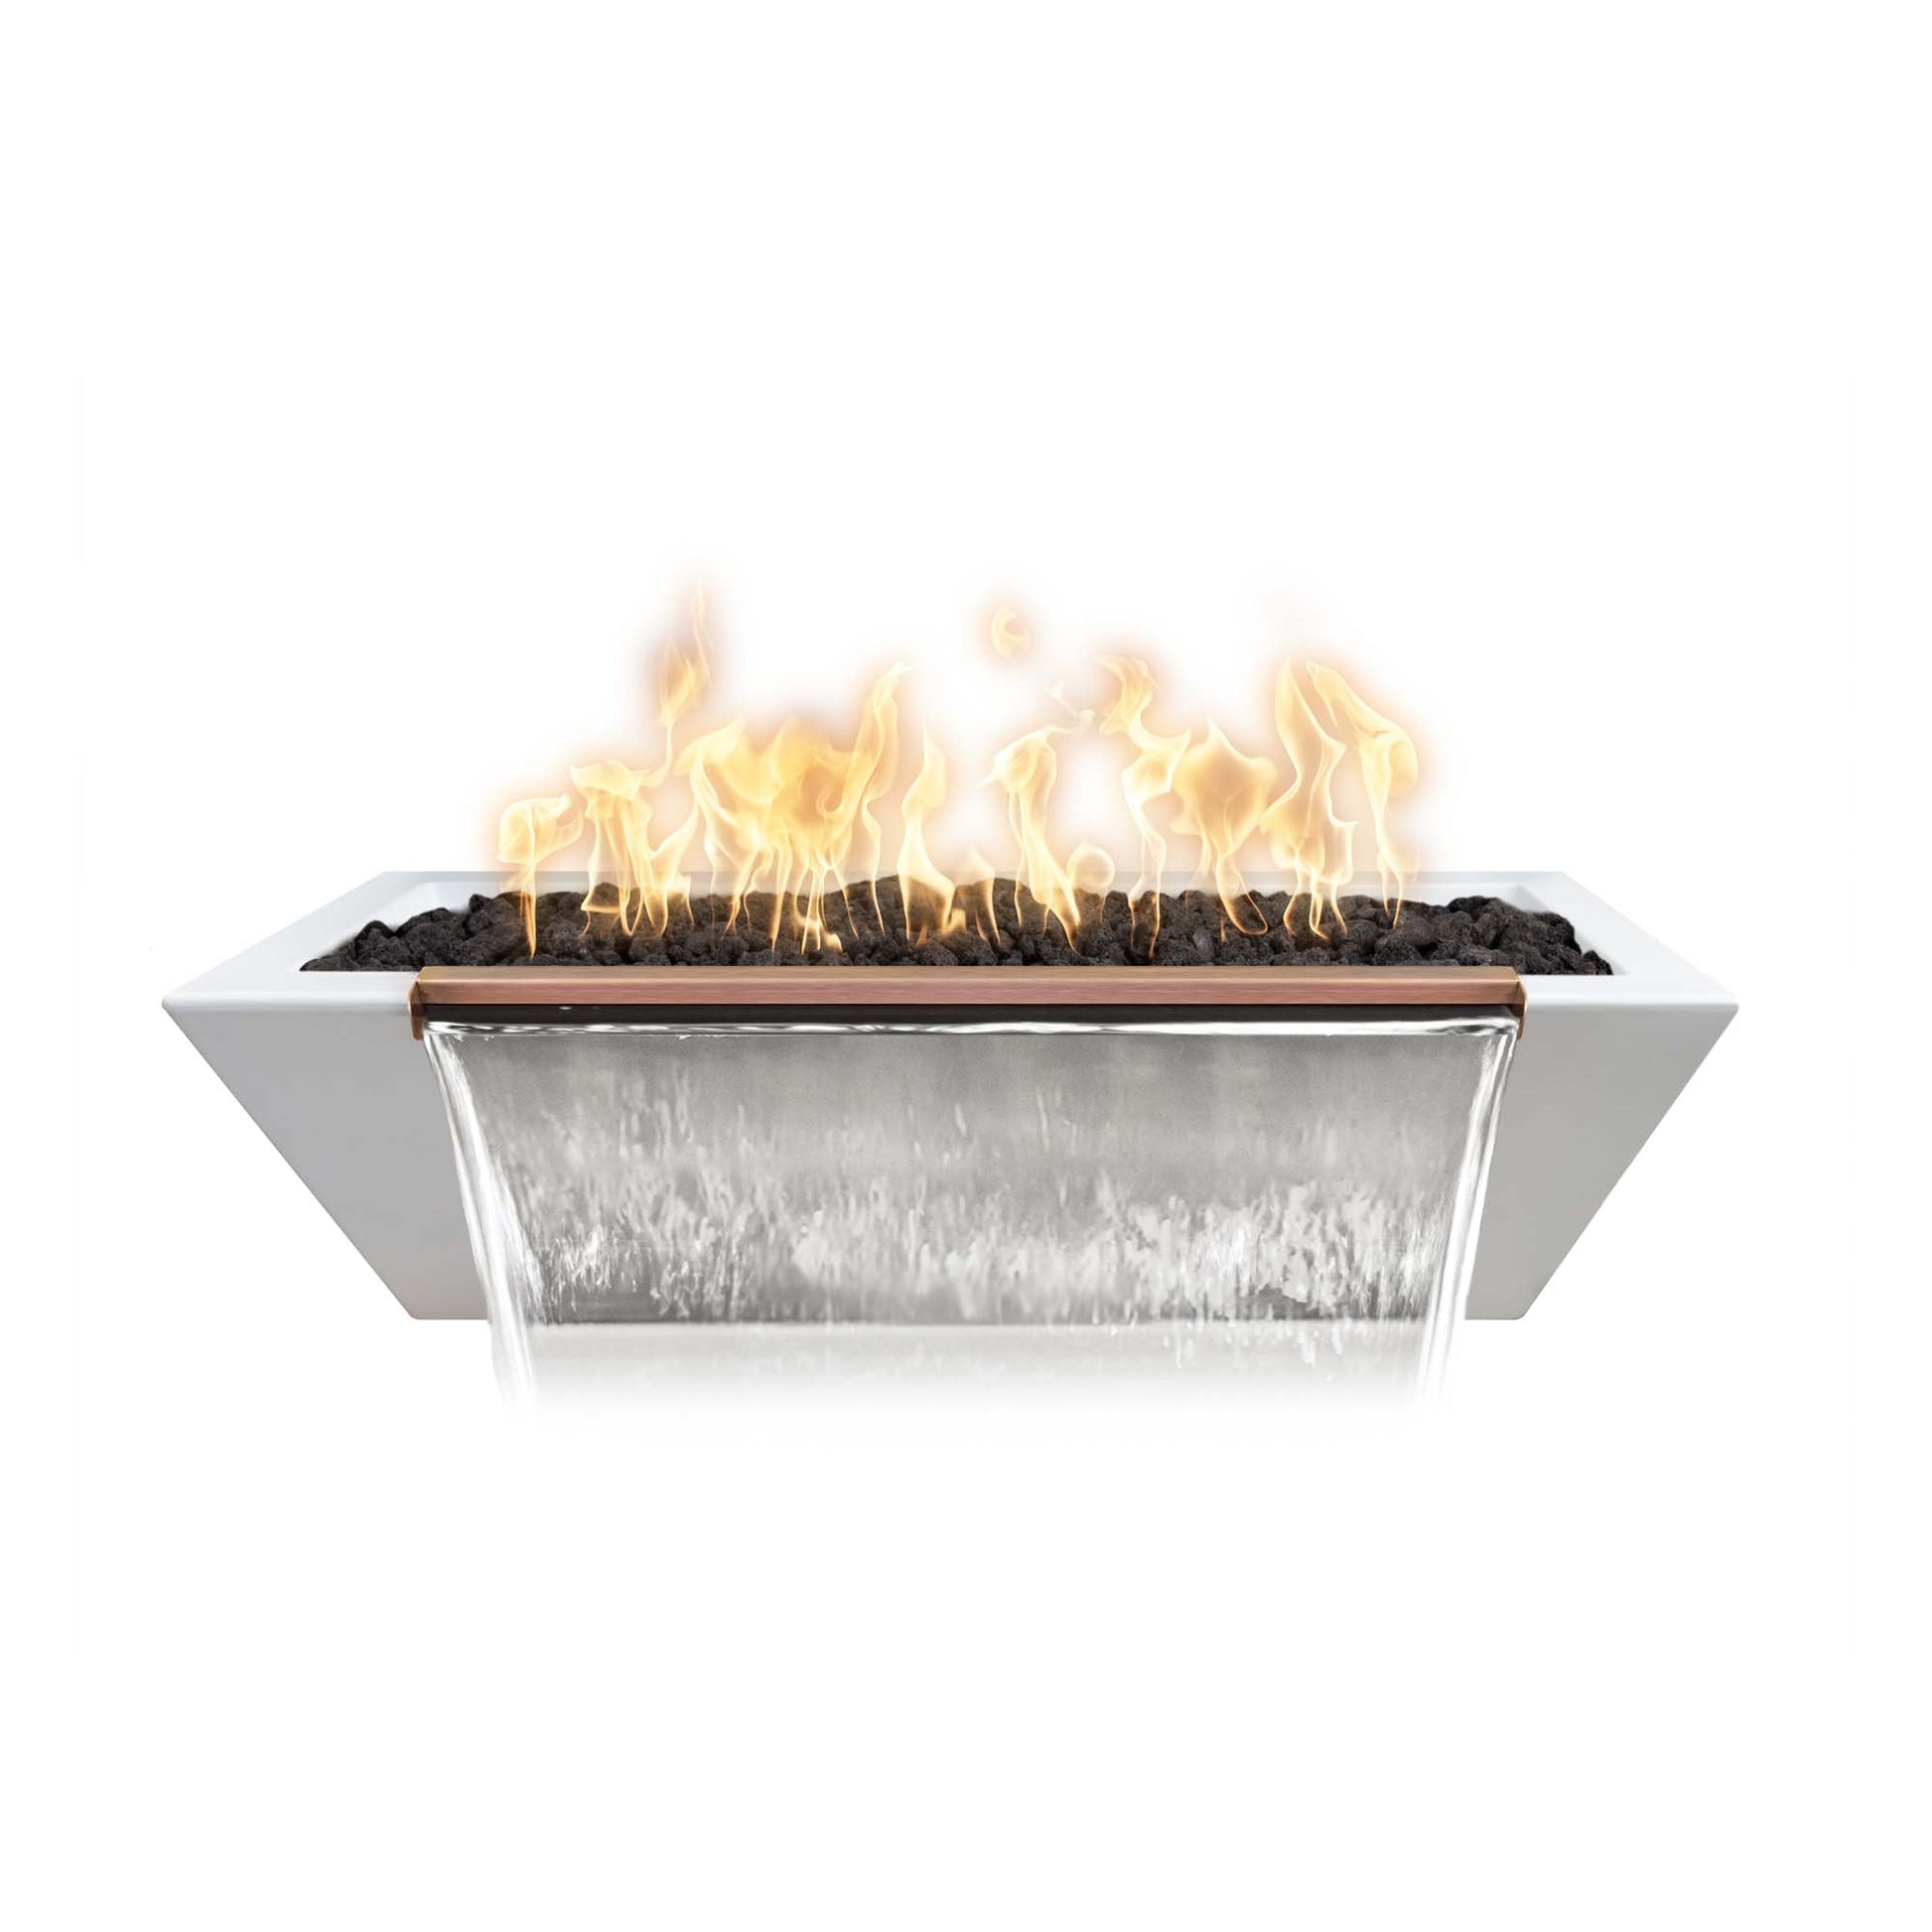 The Outdoor Plus Linear Maya 72" Rustic Coffee GFRC Concrete Liquid Propane Fire & Water Bowl with Match Lit Ignition